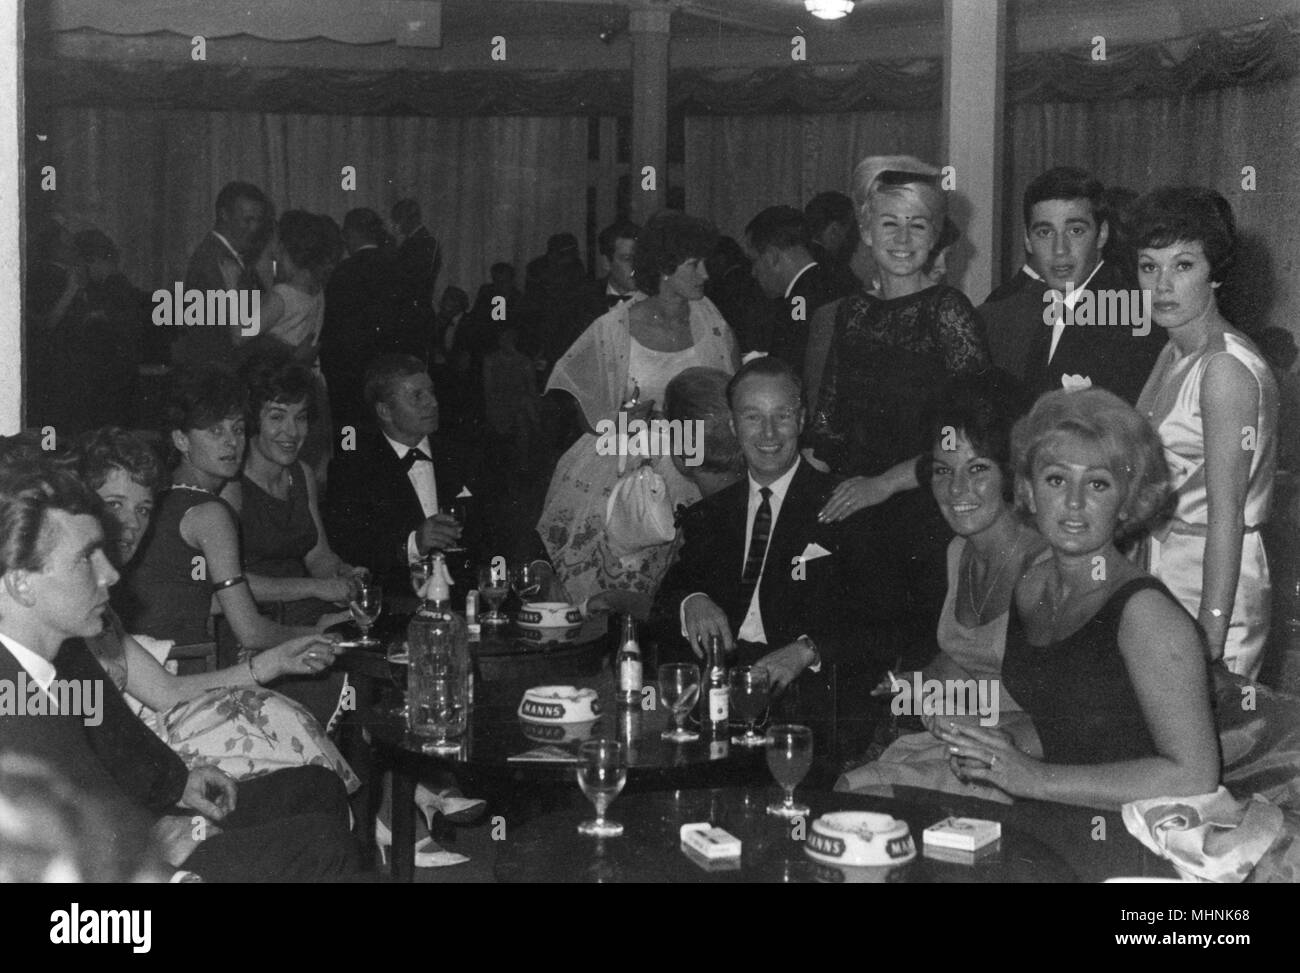 Synchronised Swimming Team end of season 'Artists' Ball' - Royal Exeter Hotel, Bournemouth, Dorset.     Date: 1962 Stock Photo